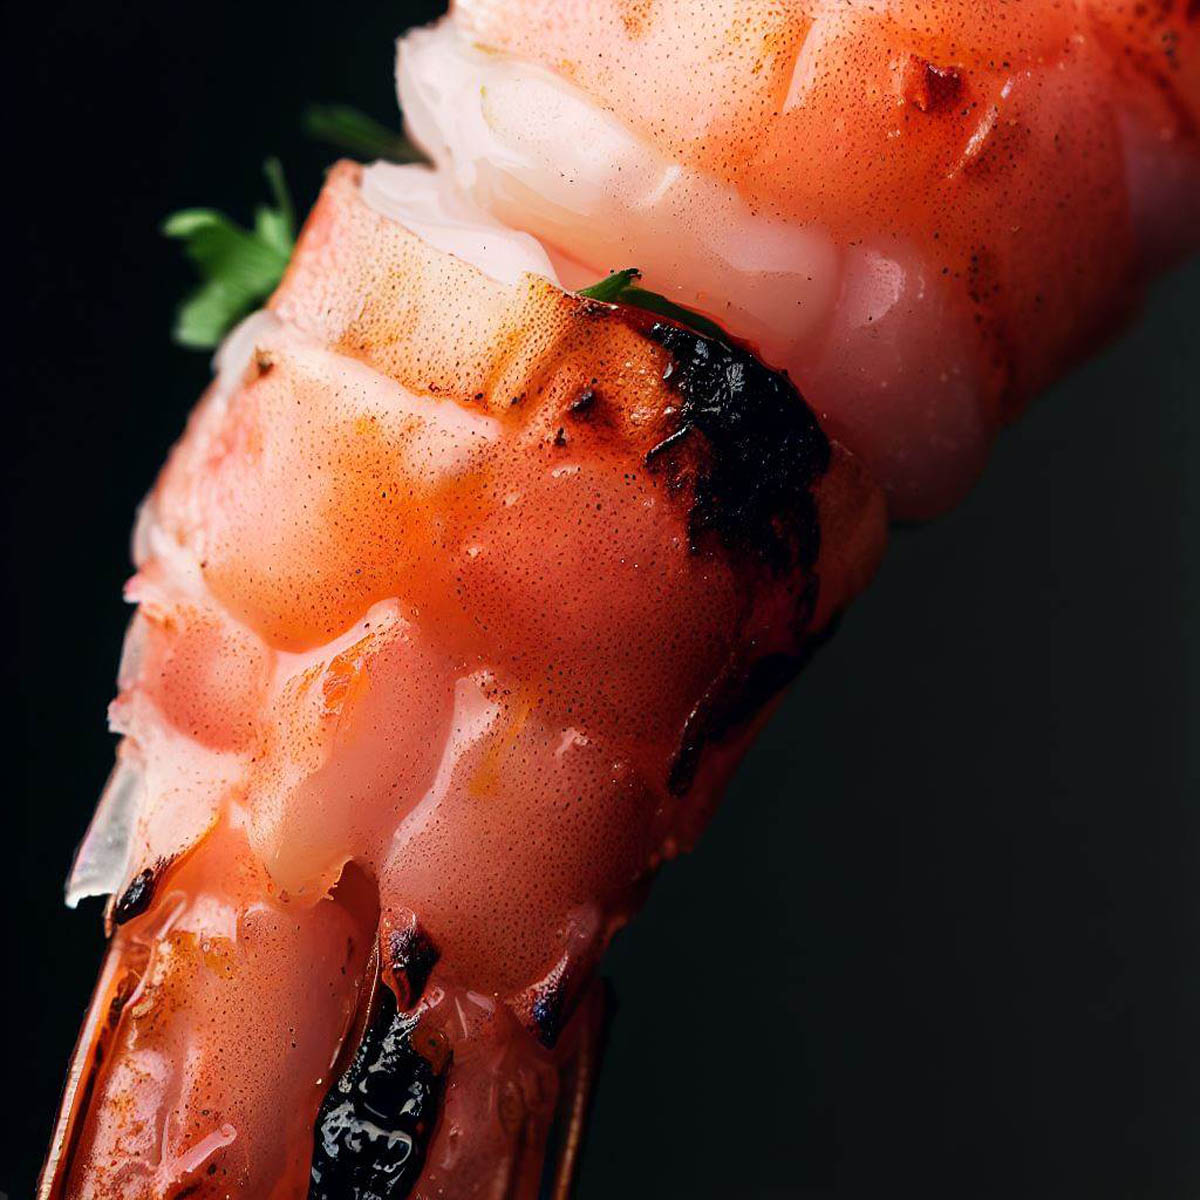  Close-up view of grilled shrimp on a skewer